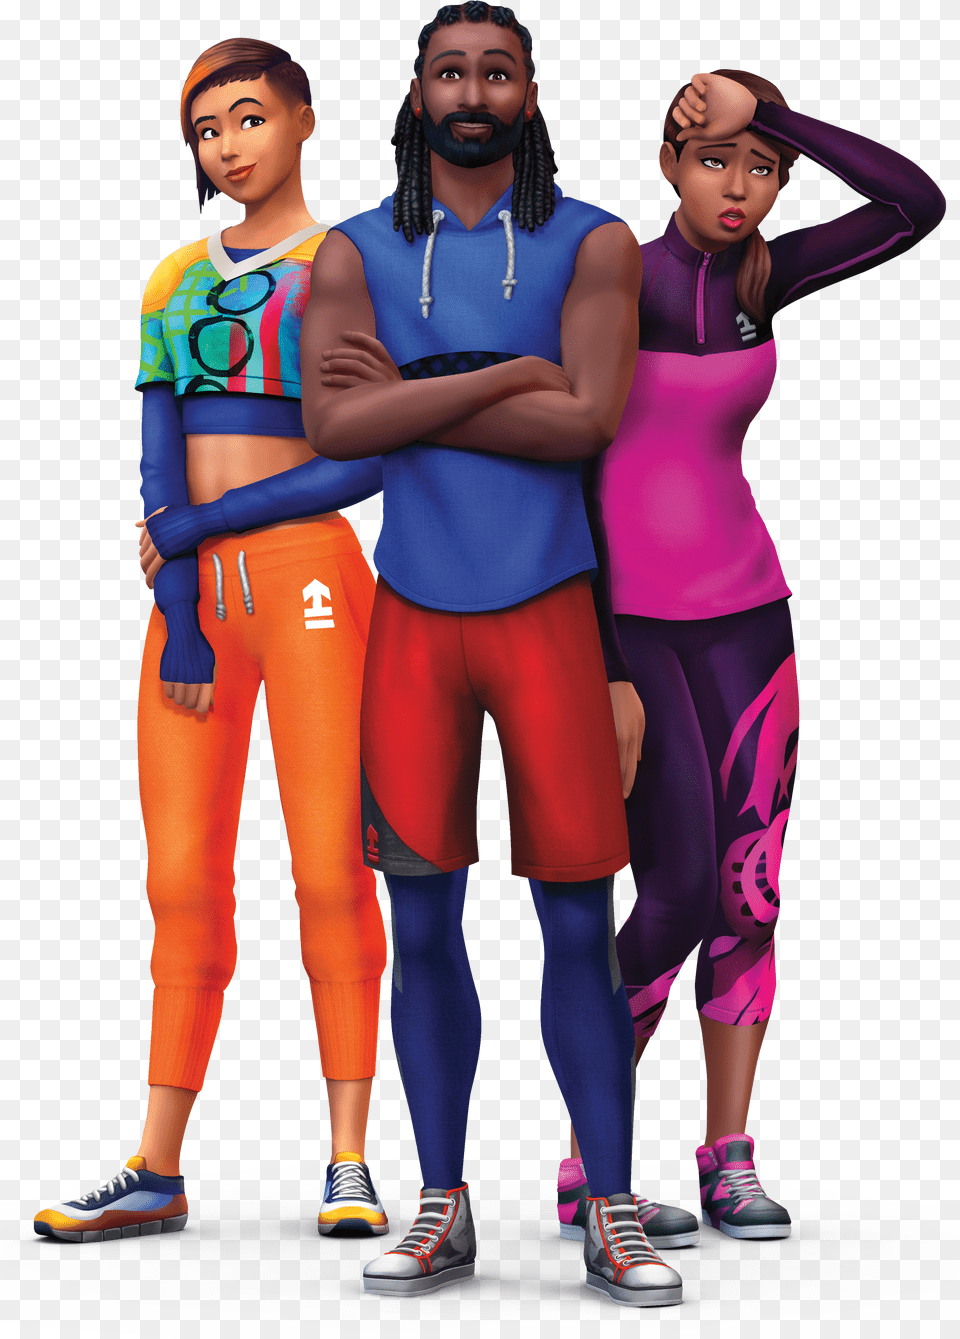 Official Sims 4 Fitness Stuff Assets Provided By Ea Sims 4 Fitness Stuff, Food, Produce Free Transparent Png